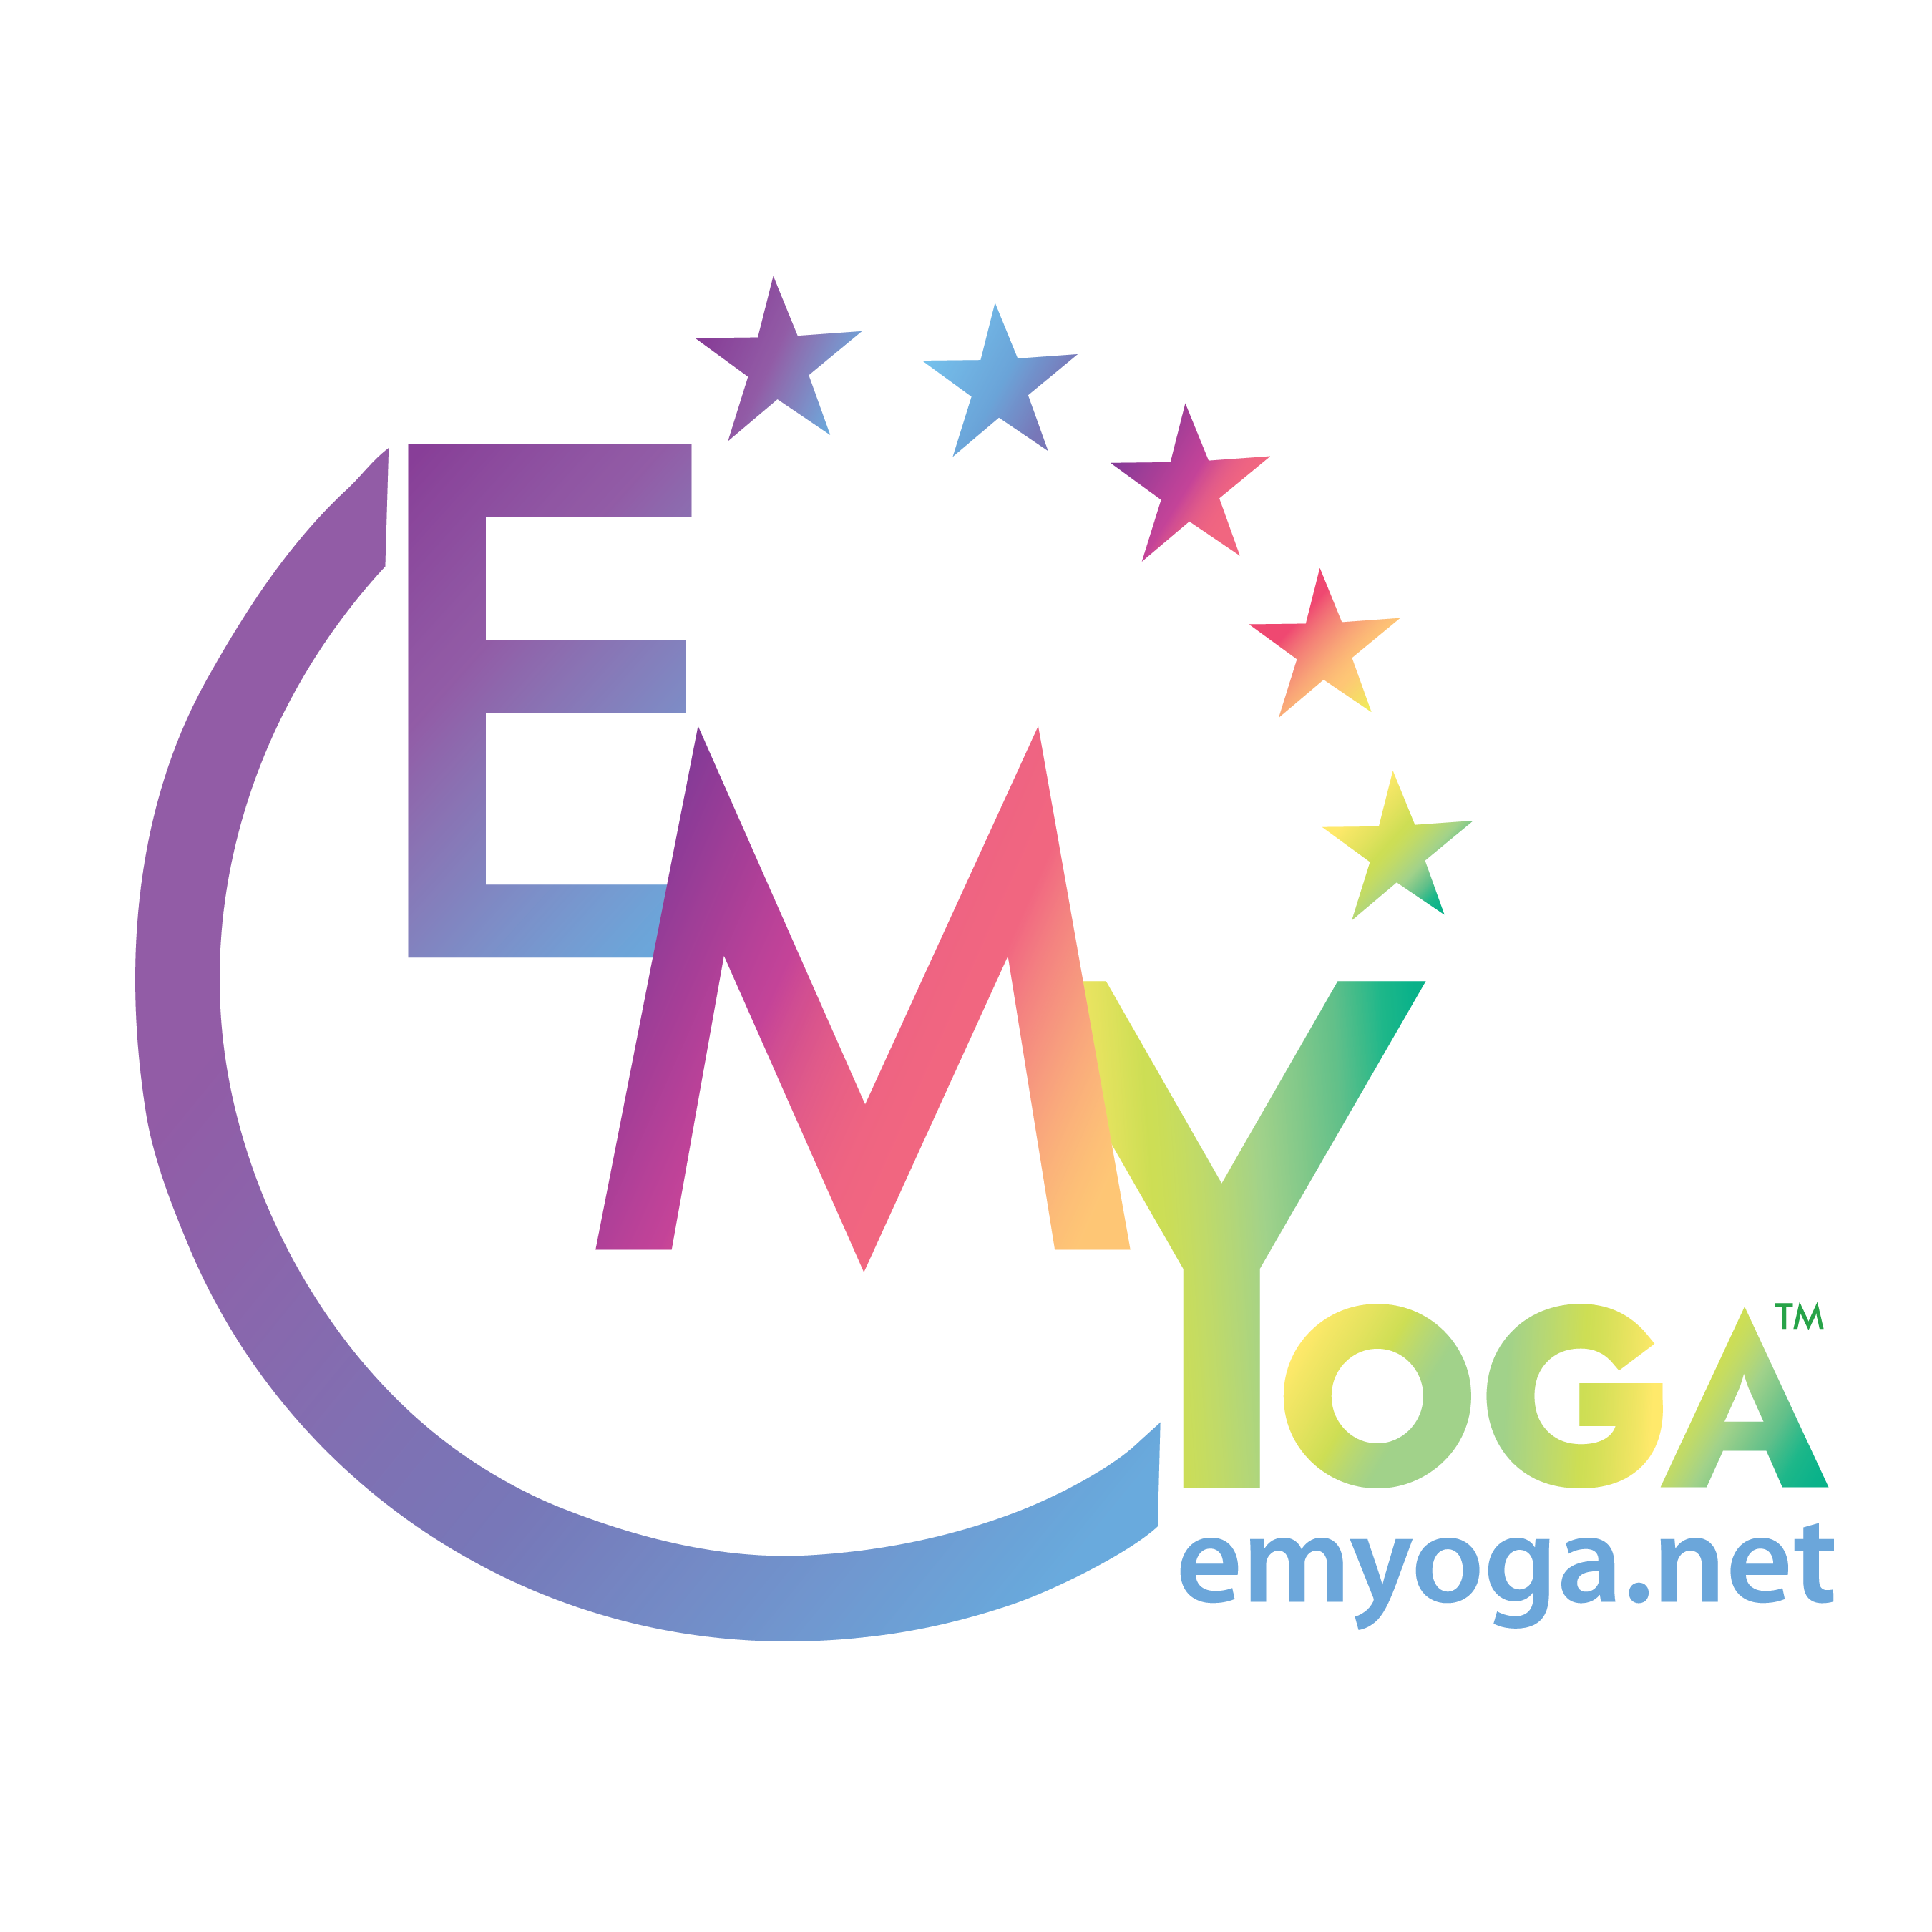 Energy Medicine Yoga - It's all in the pose!
